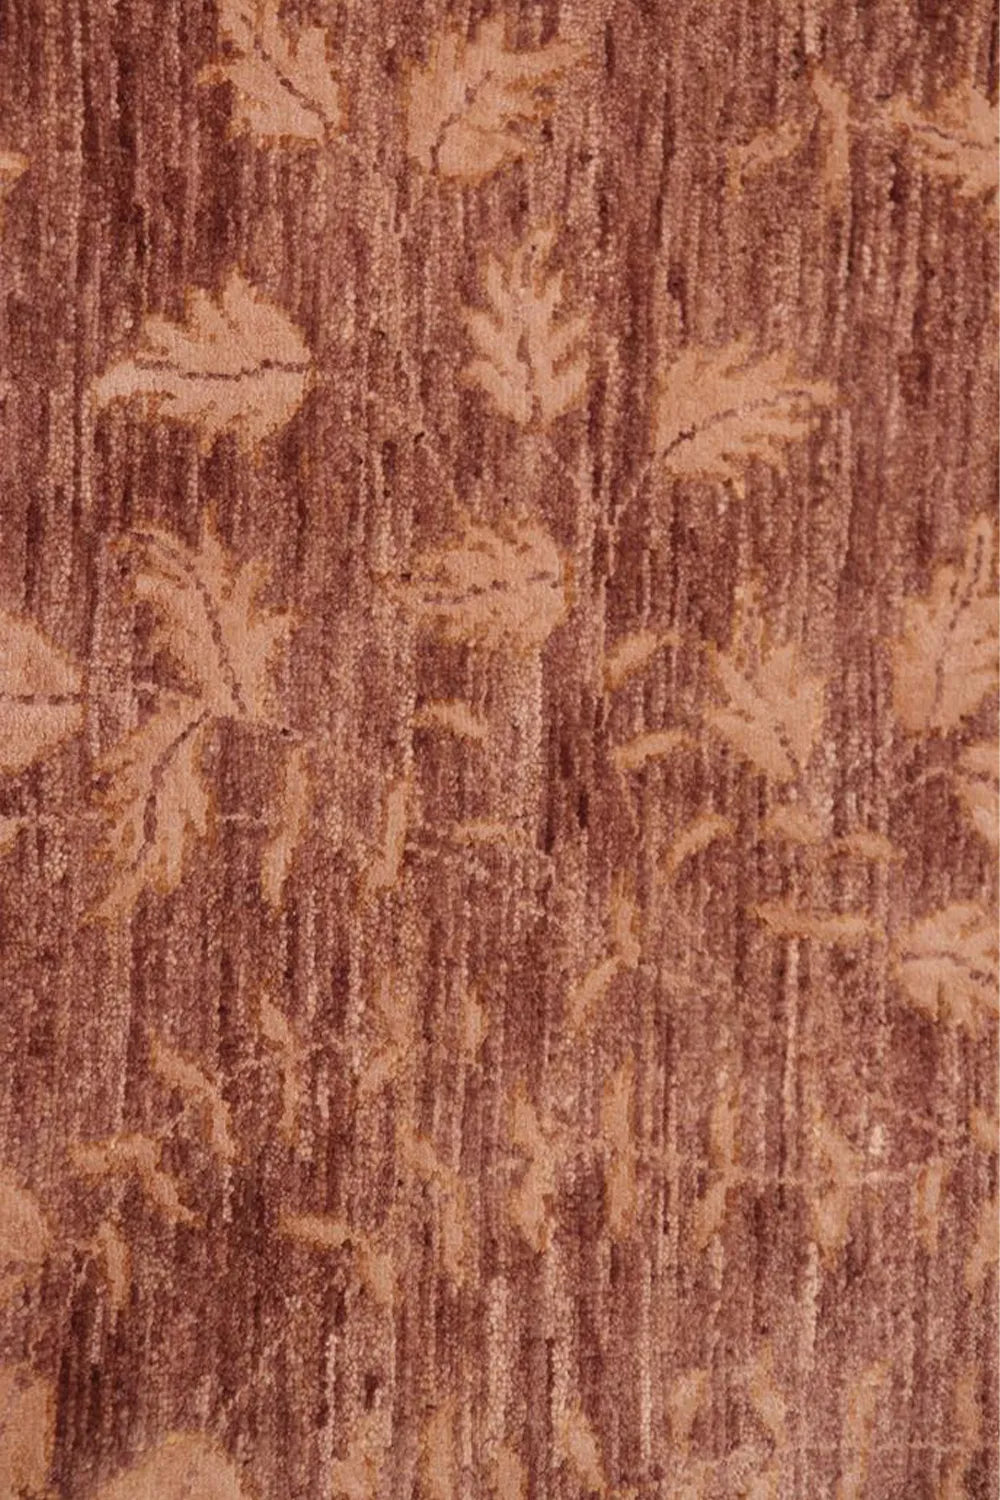 Reddish-brown wool rug with a delicate pattern for a refined interior style.